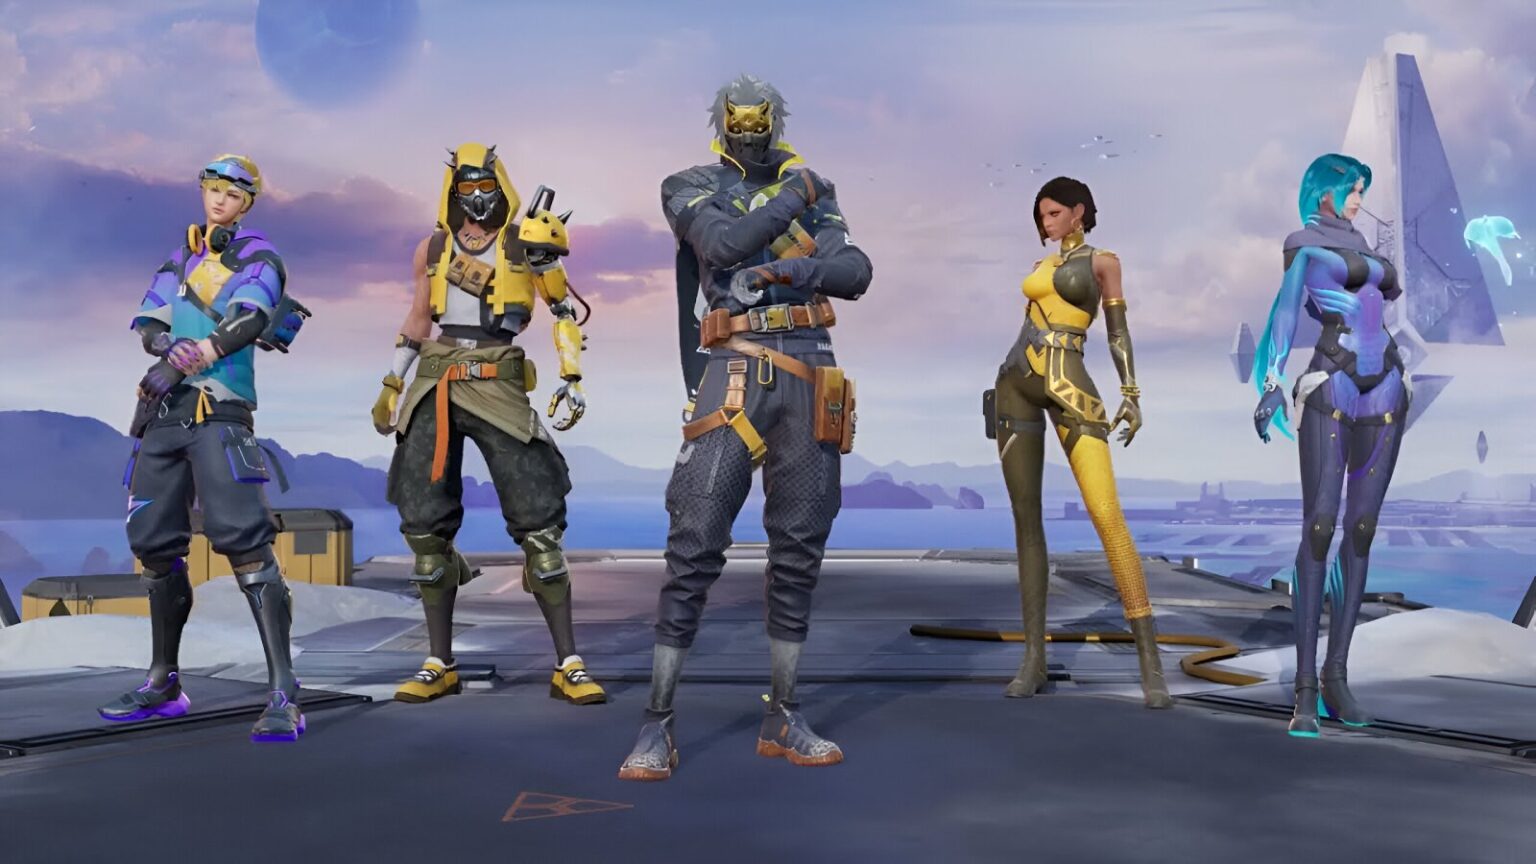 Characters poised for battle in Operation Apocalypse, showcasing diverse outfits